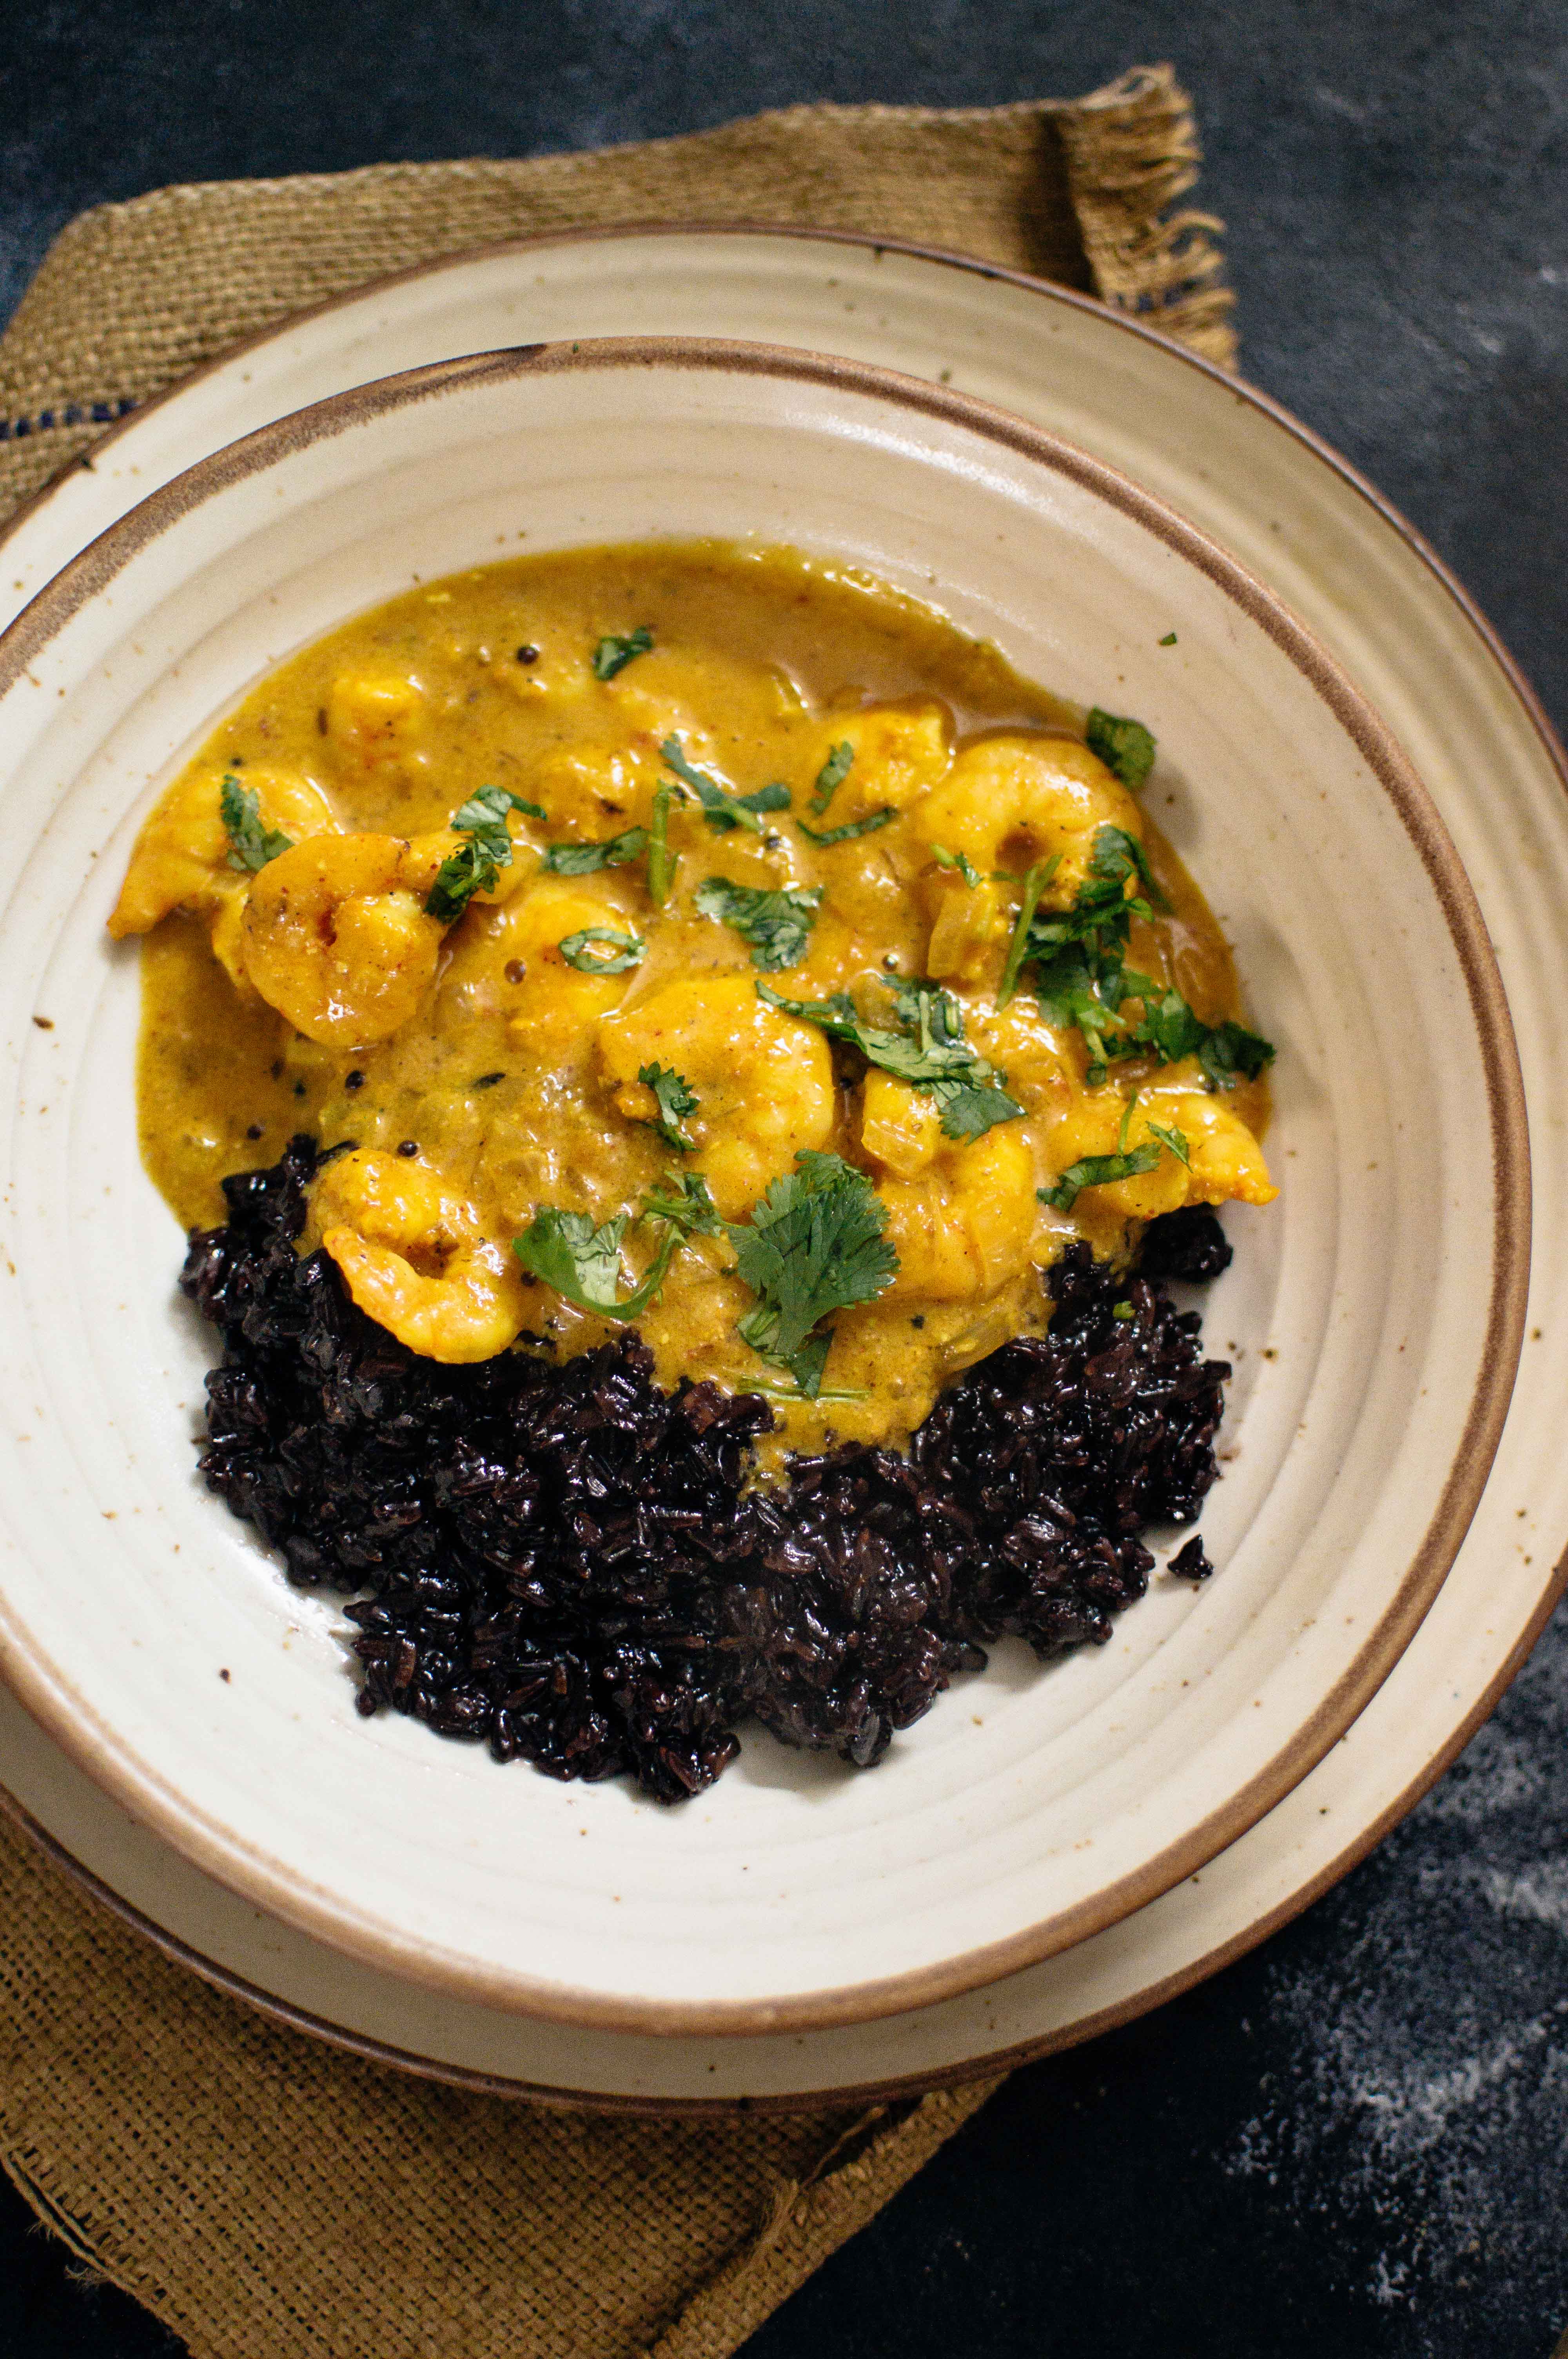 Prawn curry with black rice